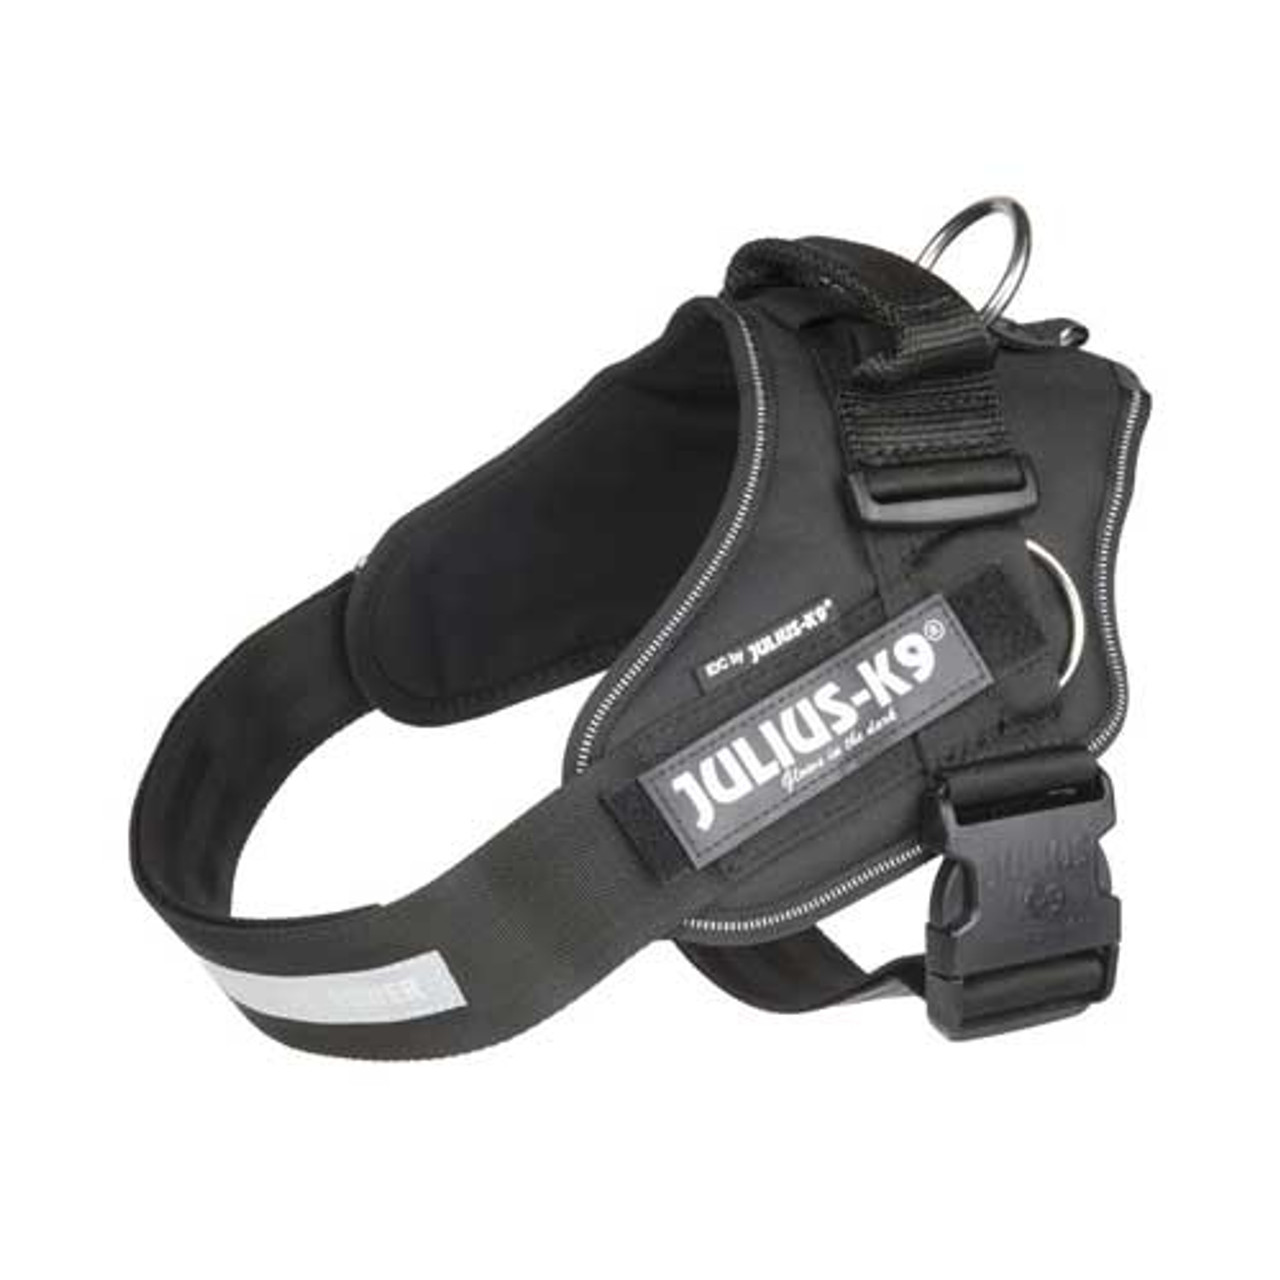 Julius-K9 IDC-Powerharness For Dogs With Siderings "Julius-K9" Illuminated Hook & Loop Patches Size: 1, Black